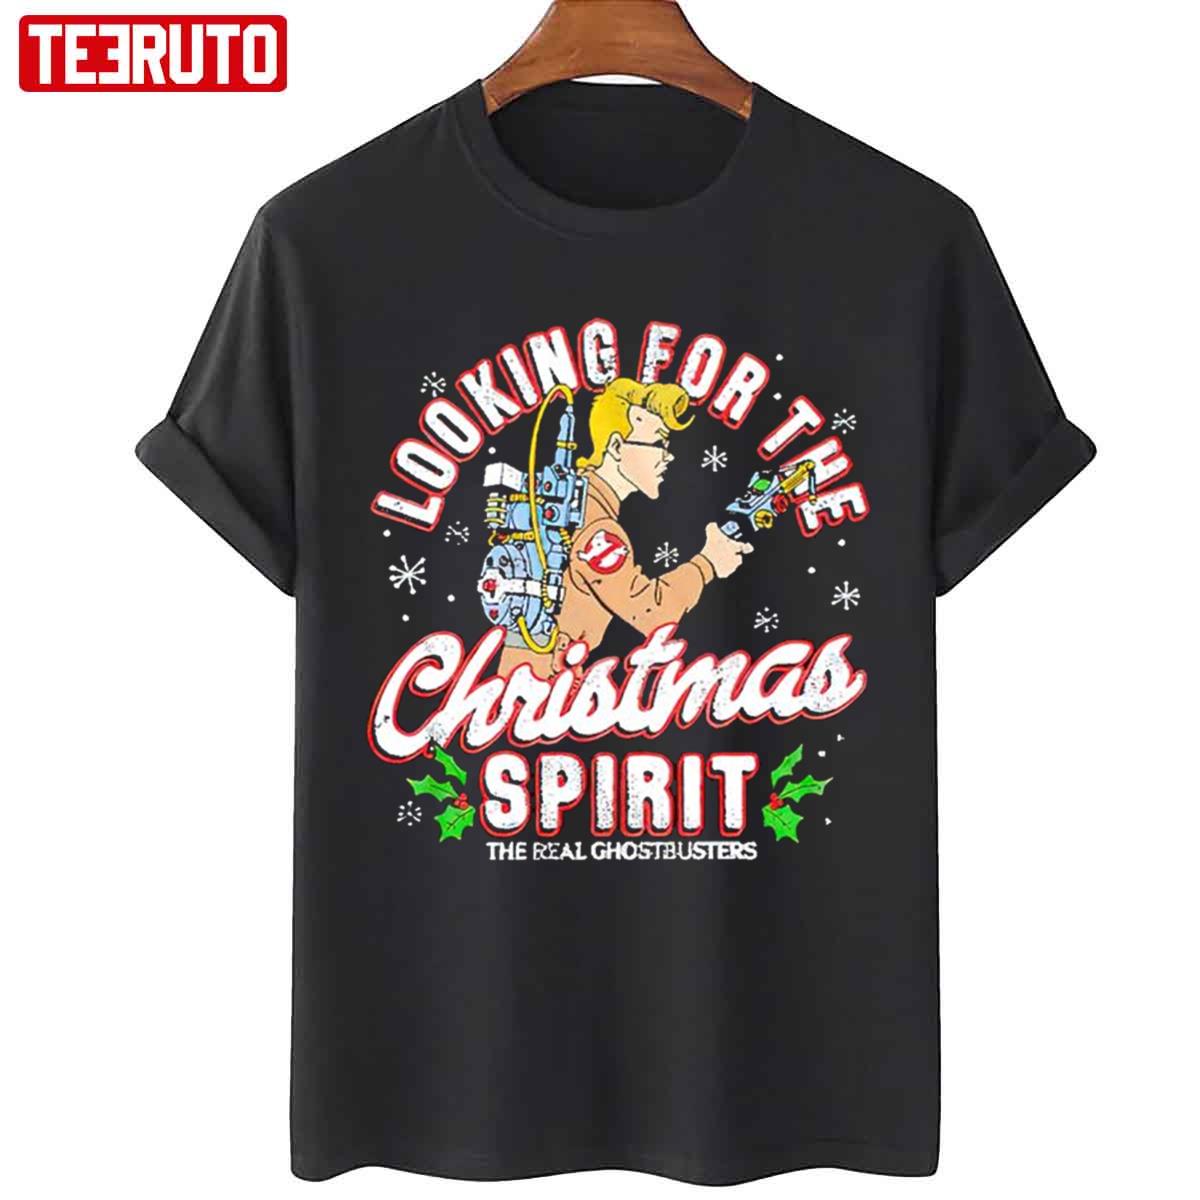 Looking For The Christmas Spirit The Real Ghostbusters Unisex T-Shirt